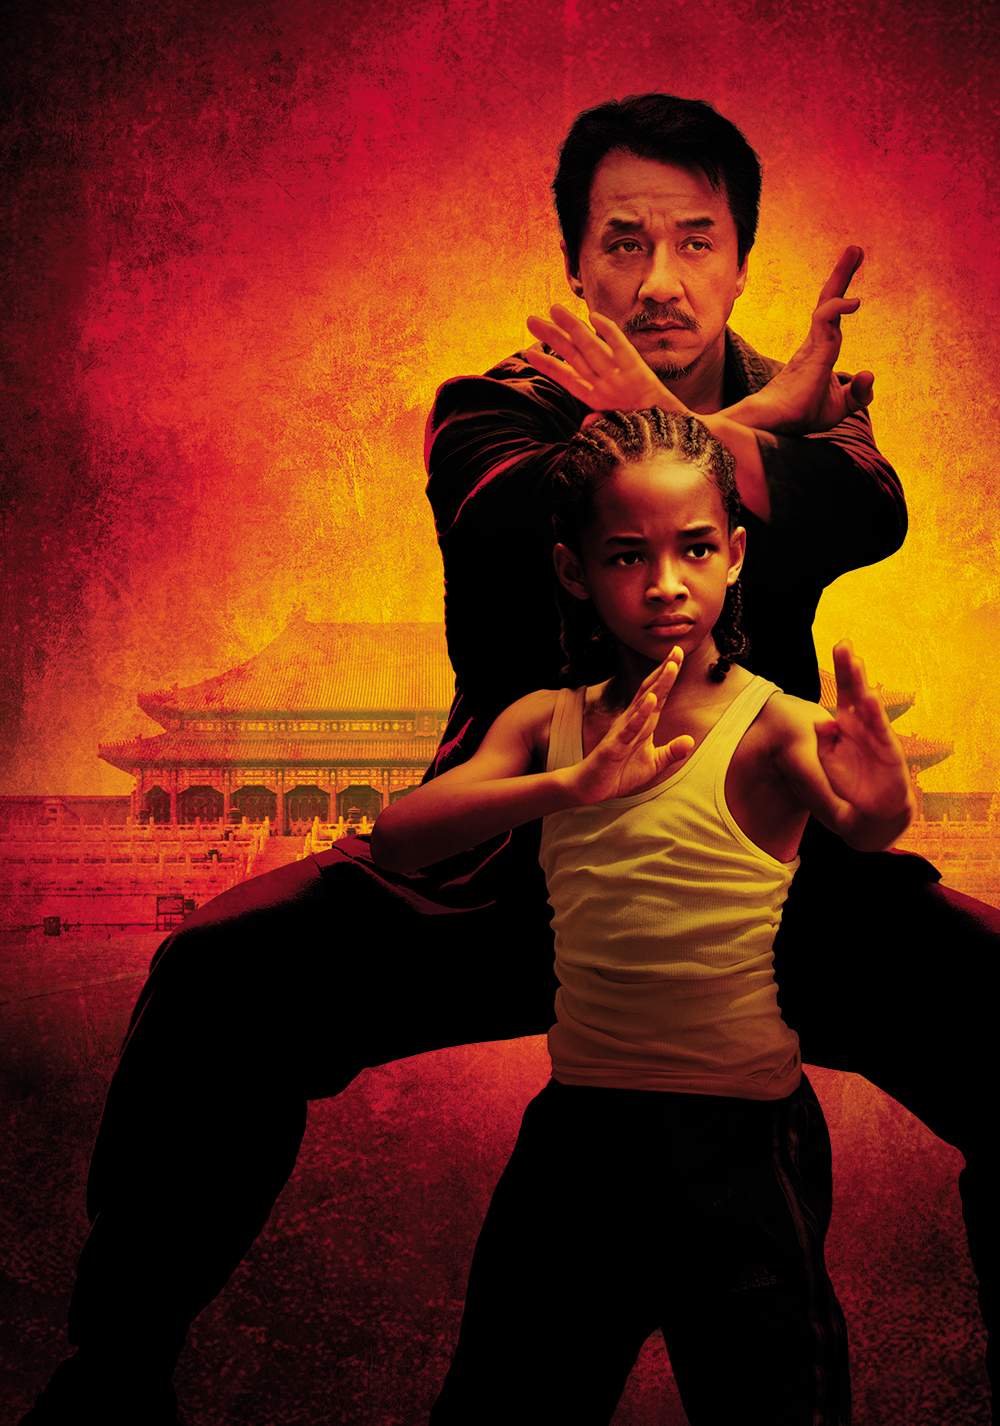 The Karate Kid (2010) Picture